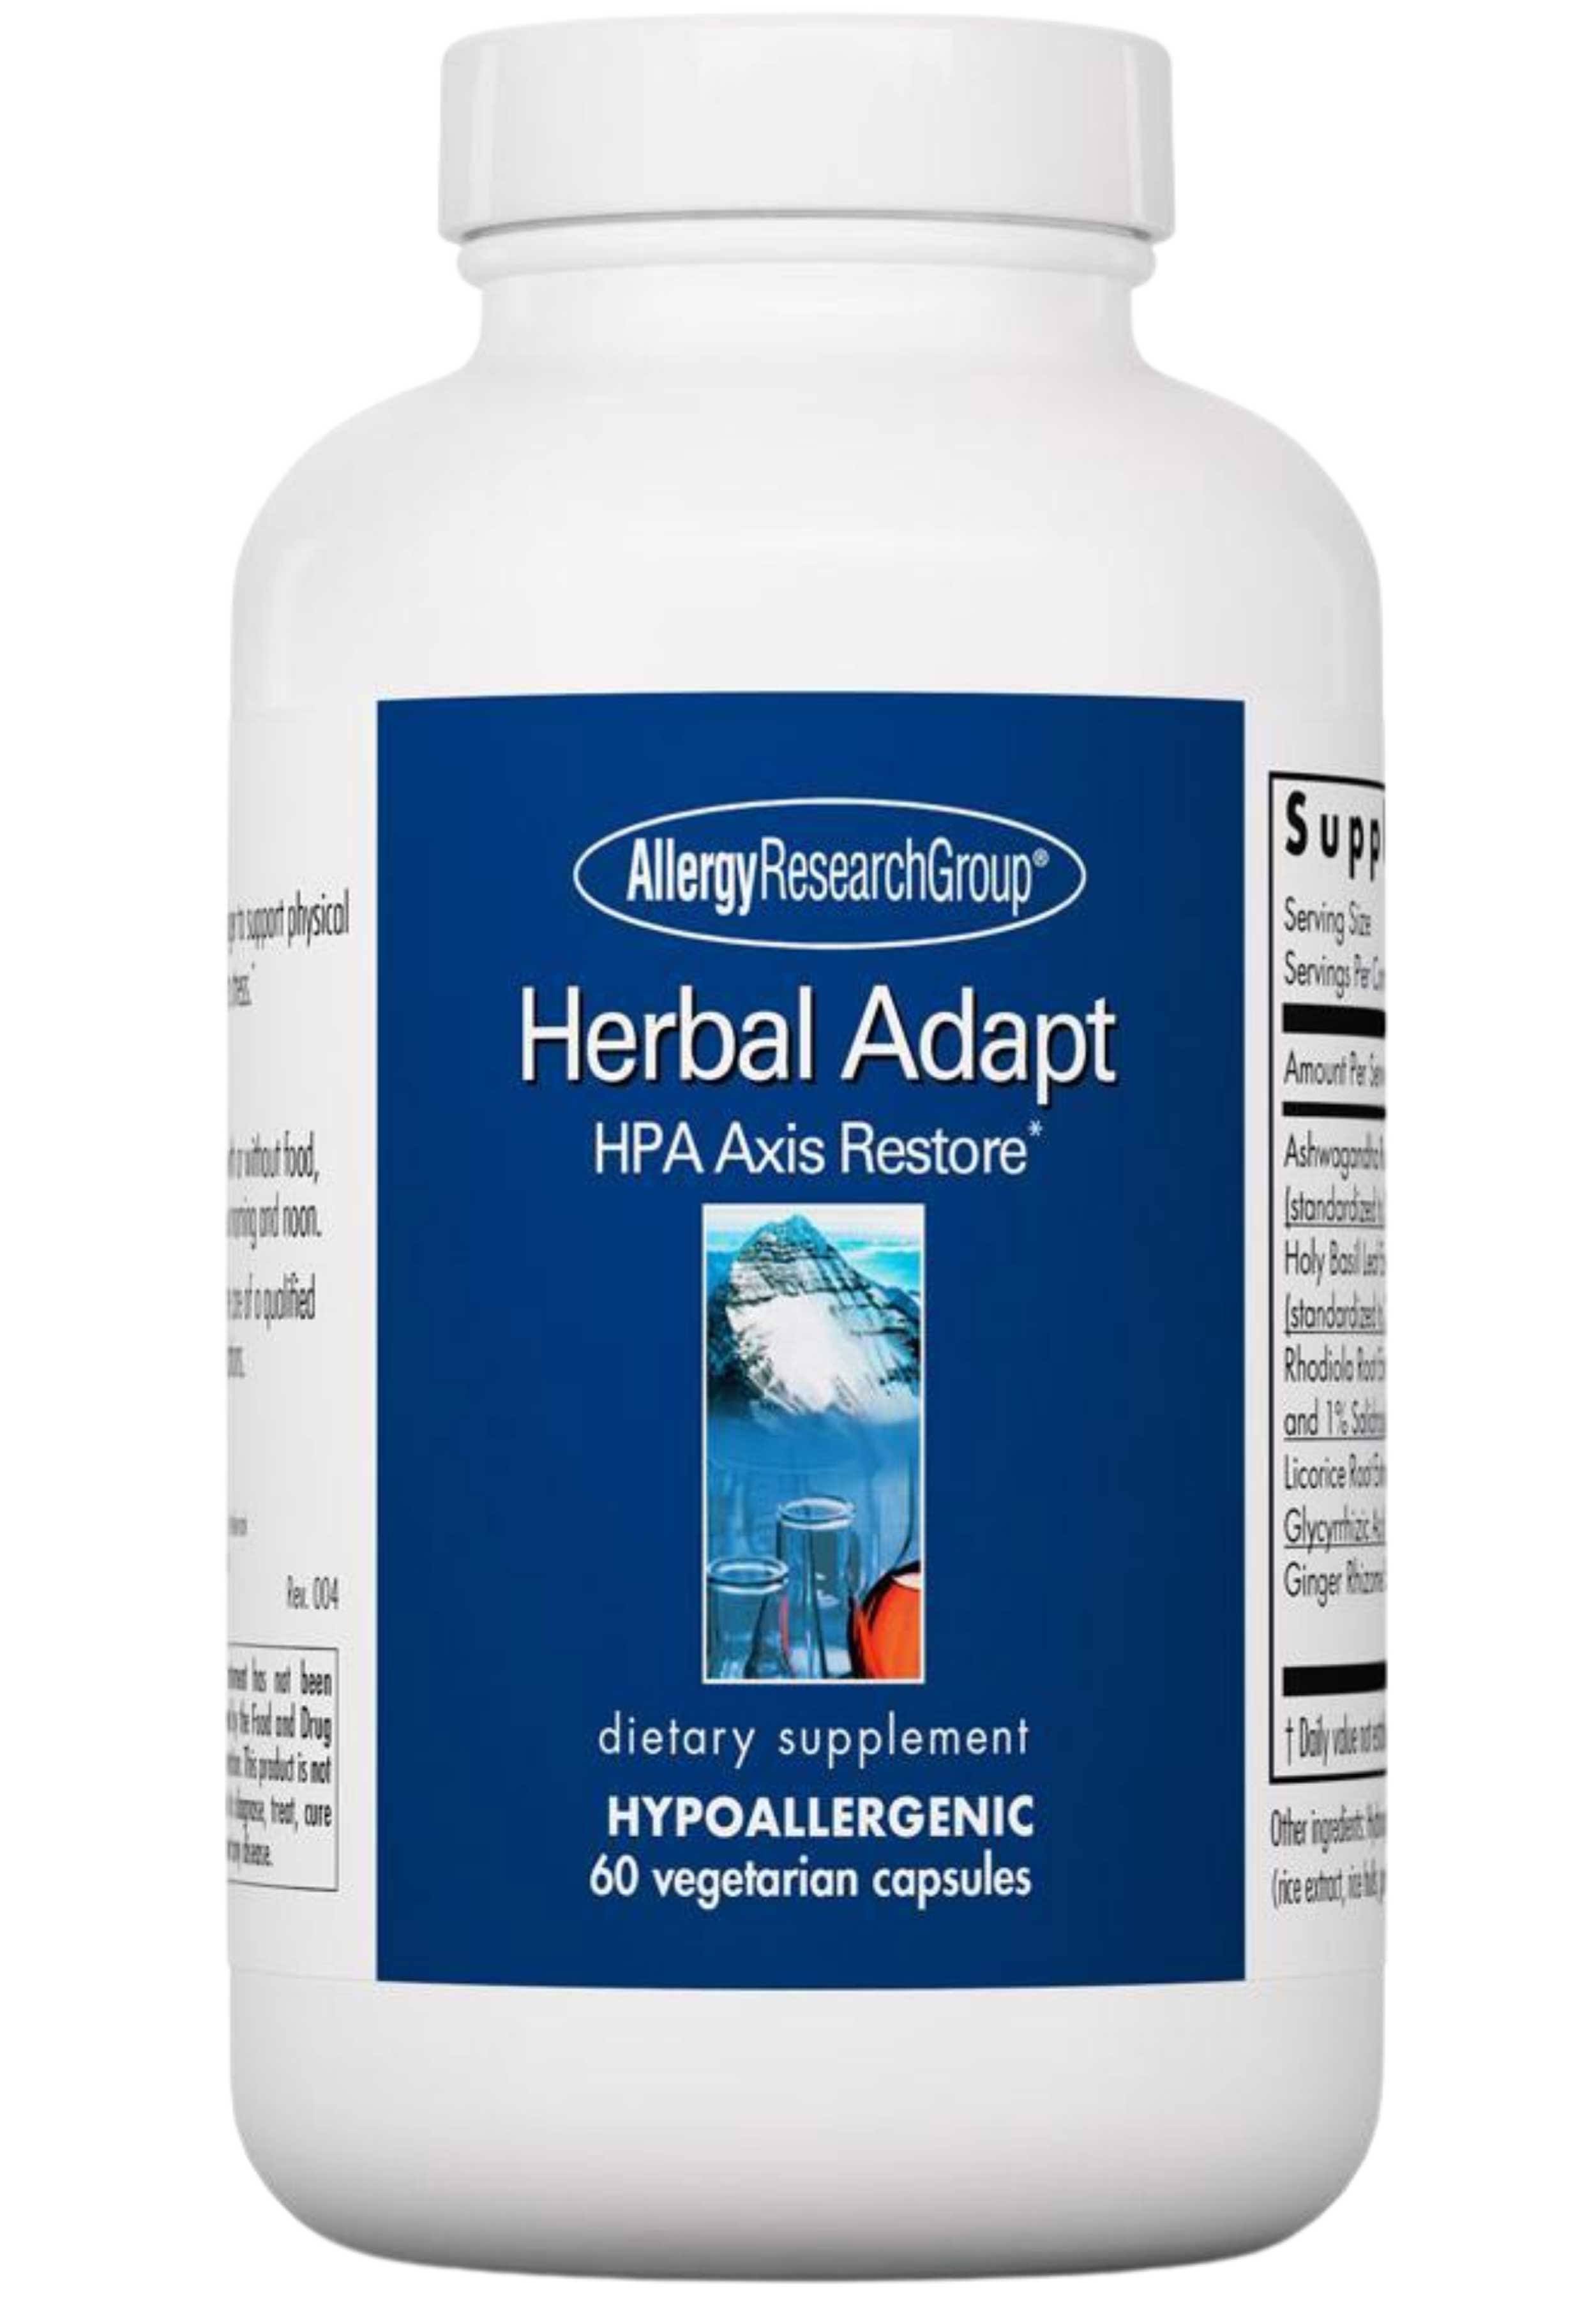 Allergy Research Group Herbal Adapt HPA Axis Restore